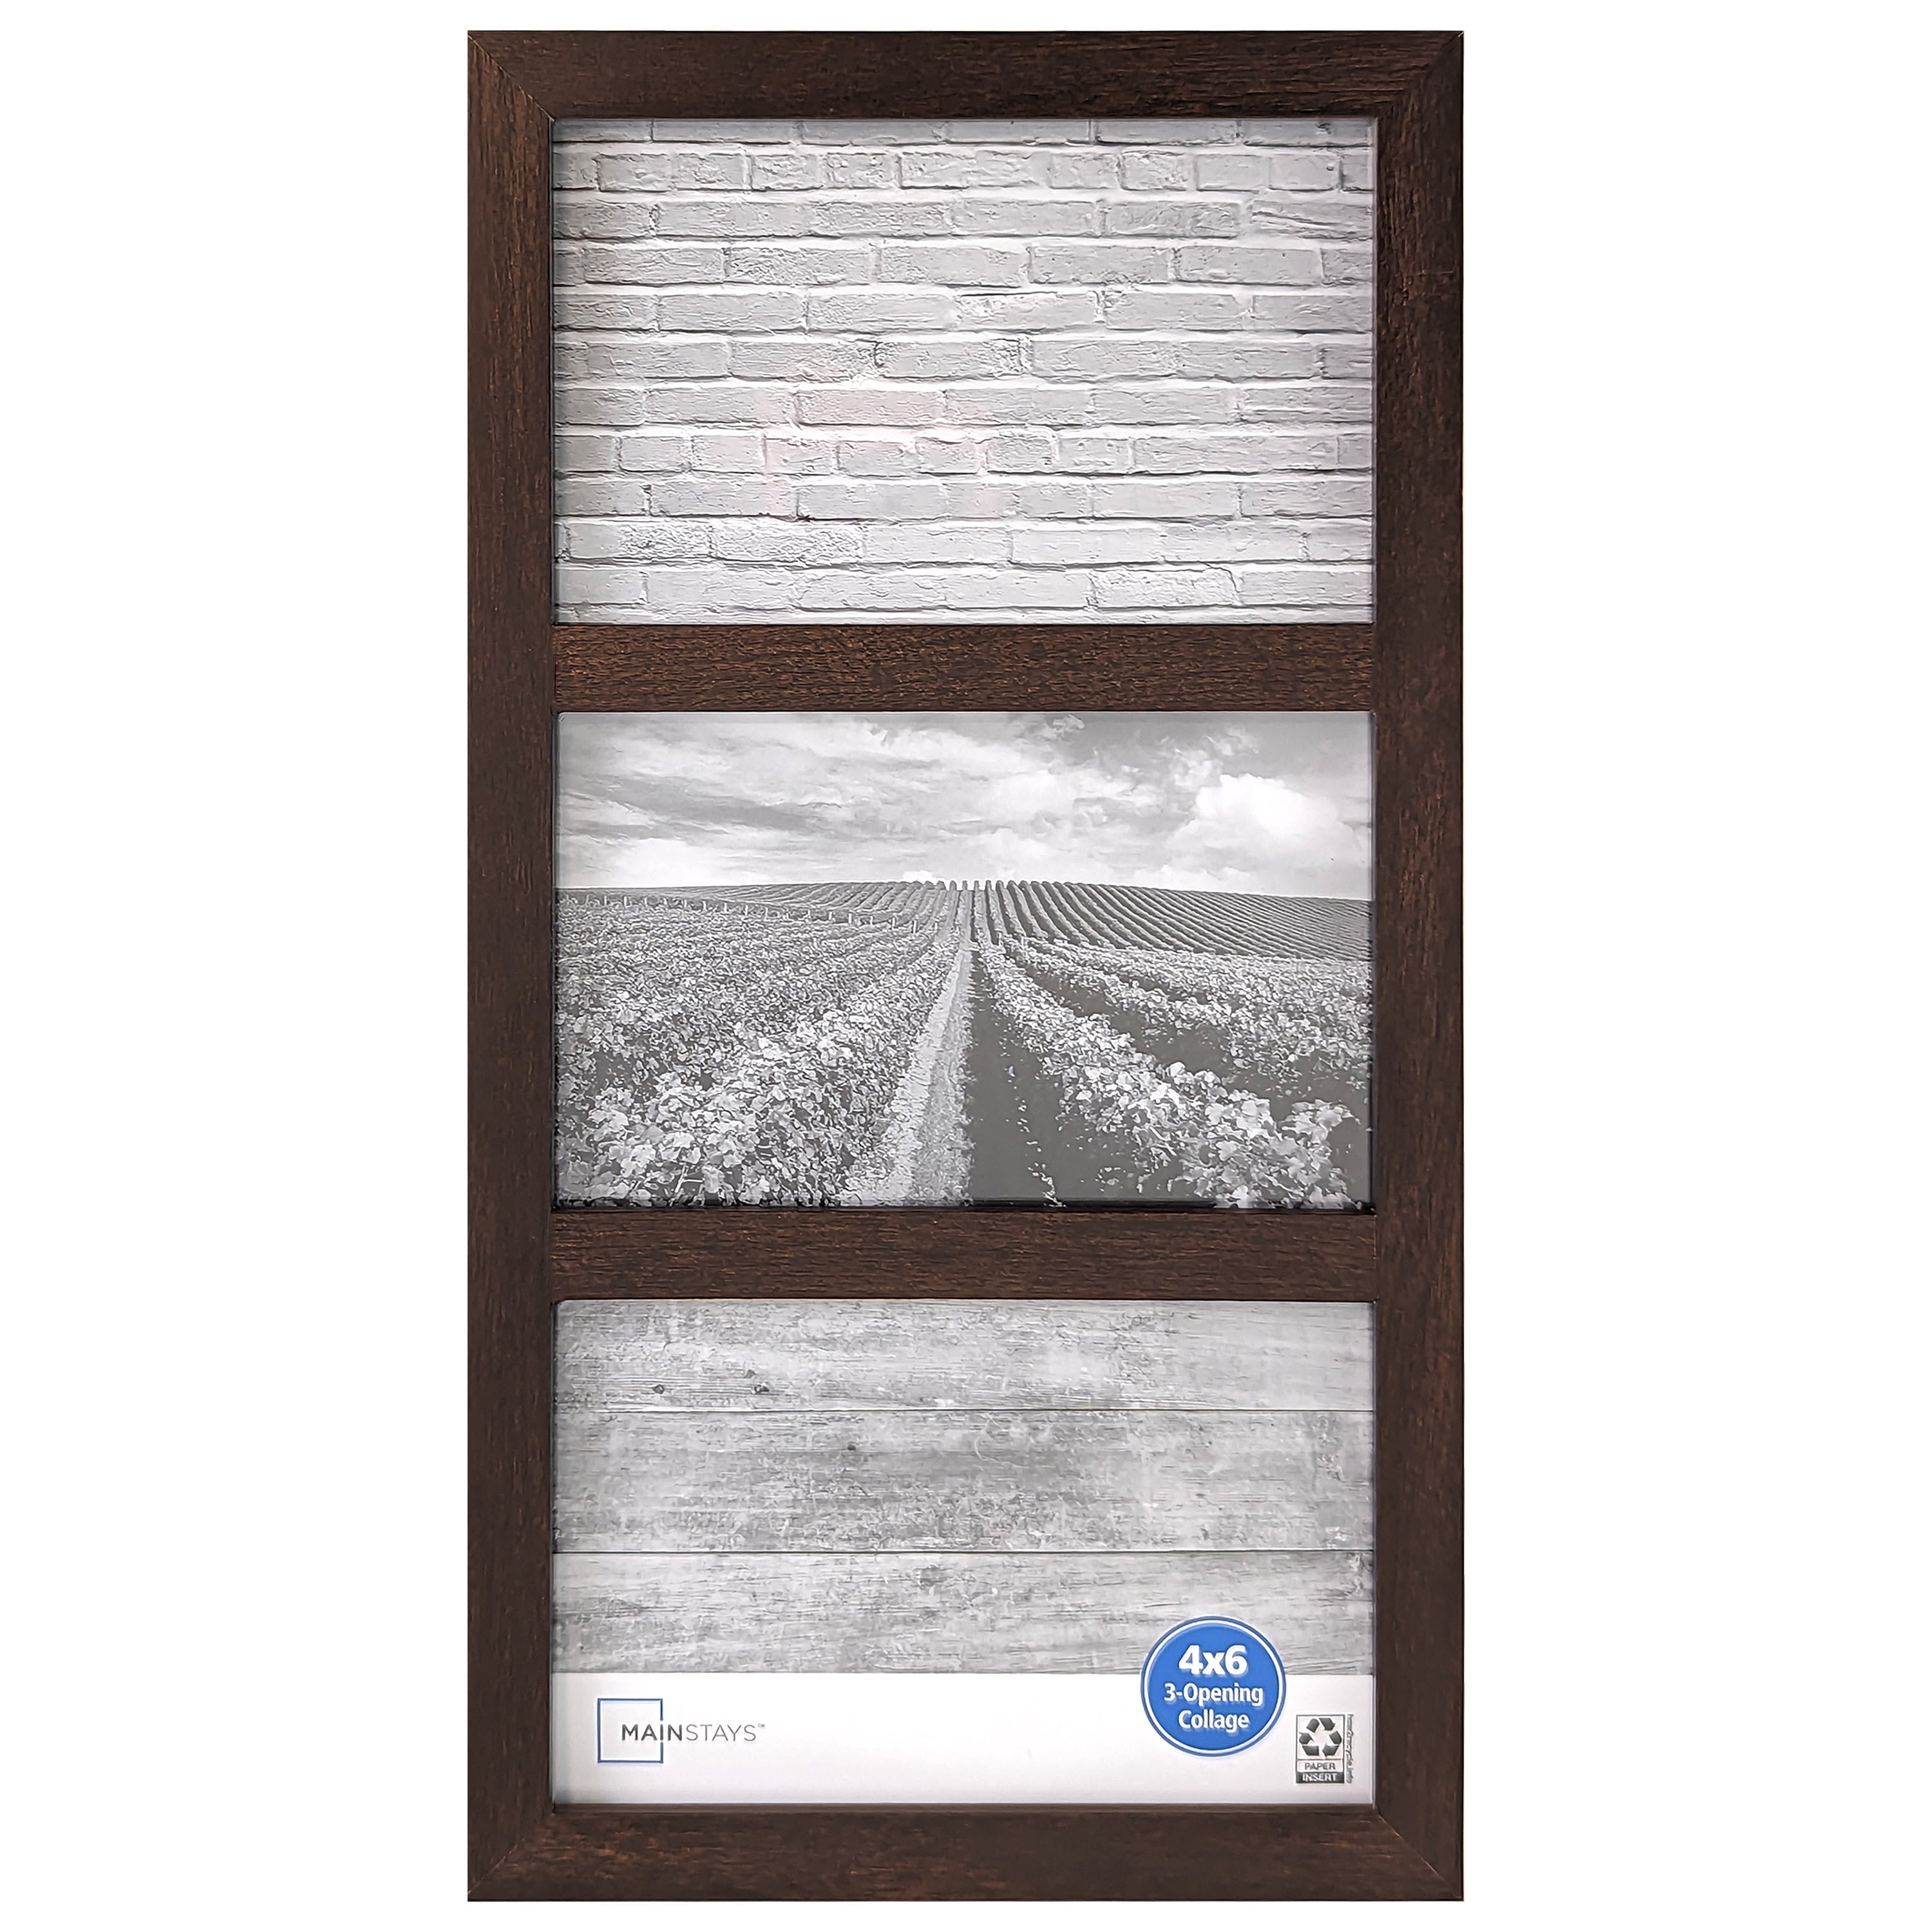 Mainstays 8-Opening Plaque Black Wall Collage Frame (Holds 6-4x6 inch & 2-4x4 inch Photos), Size: 16 x 18.5